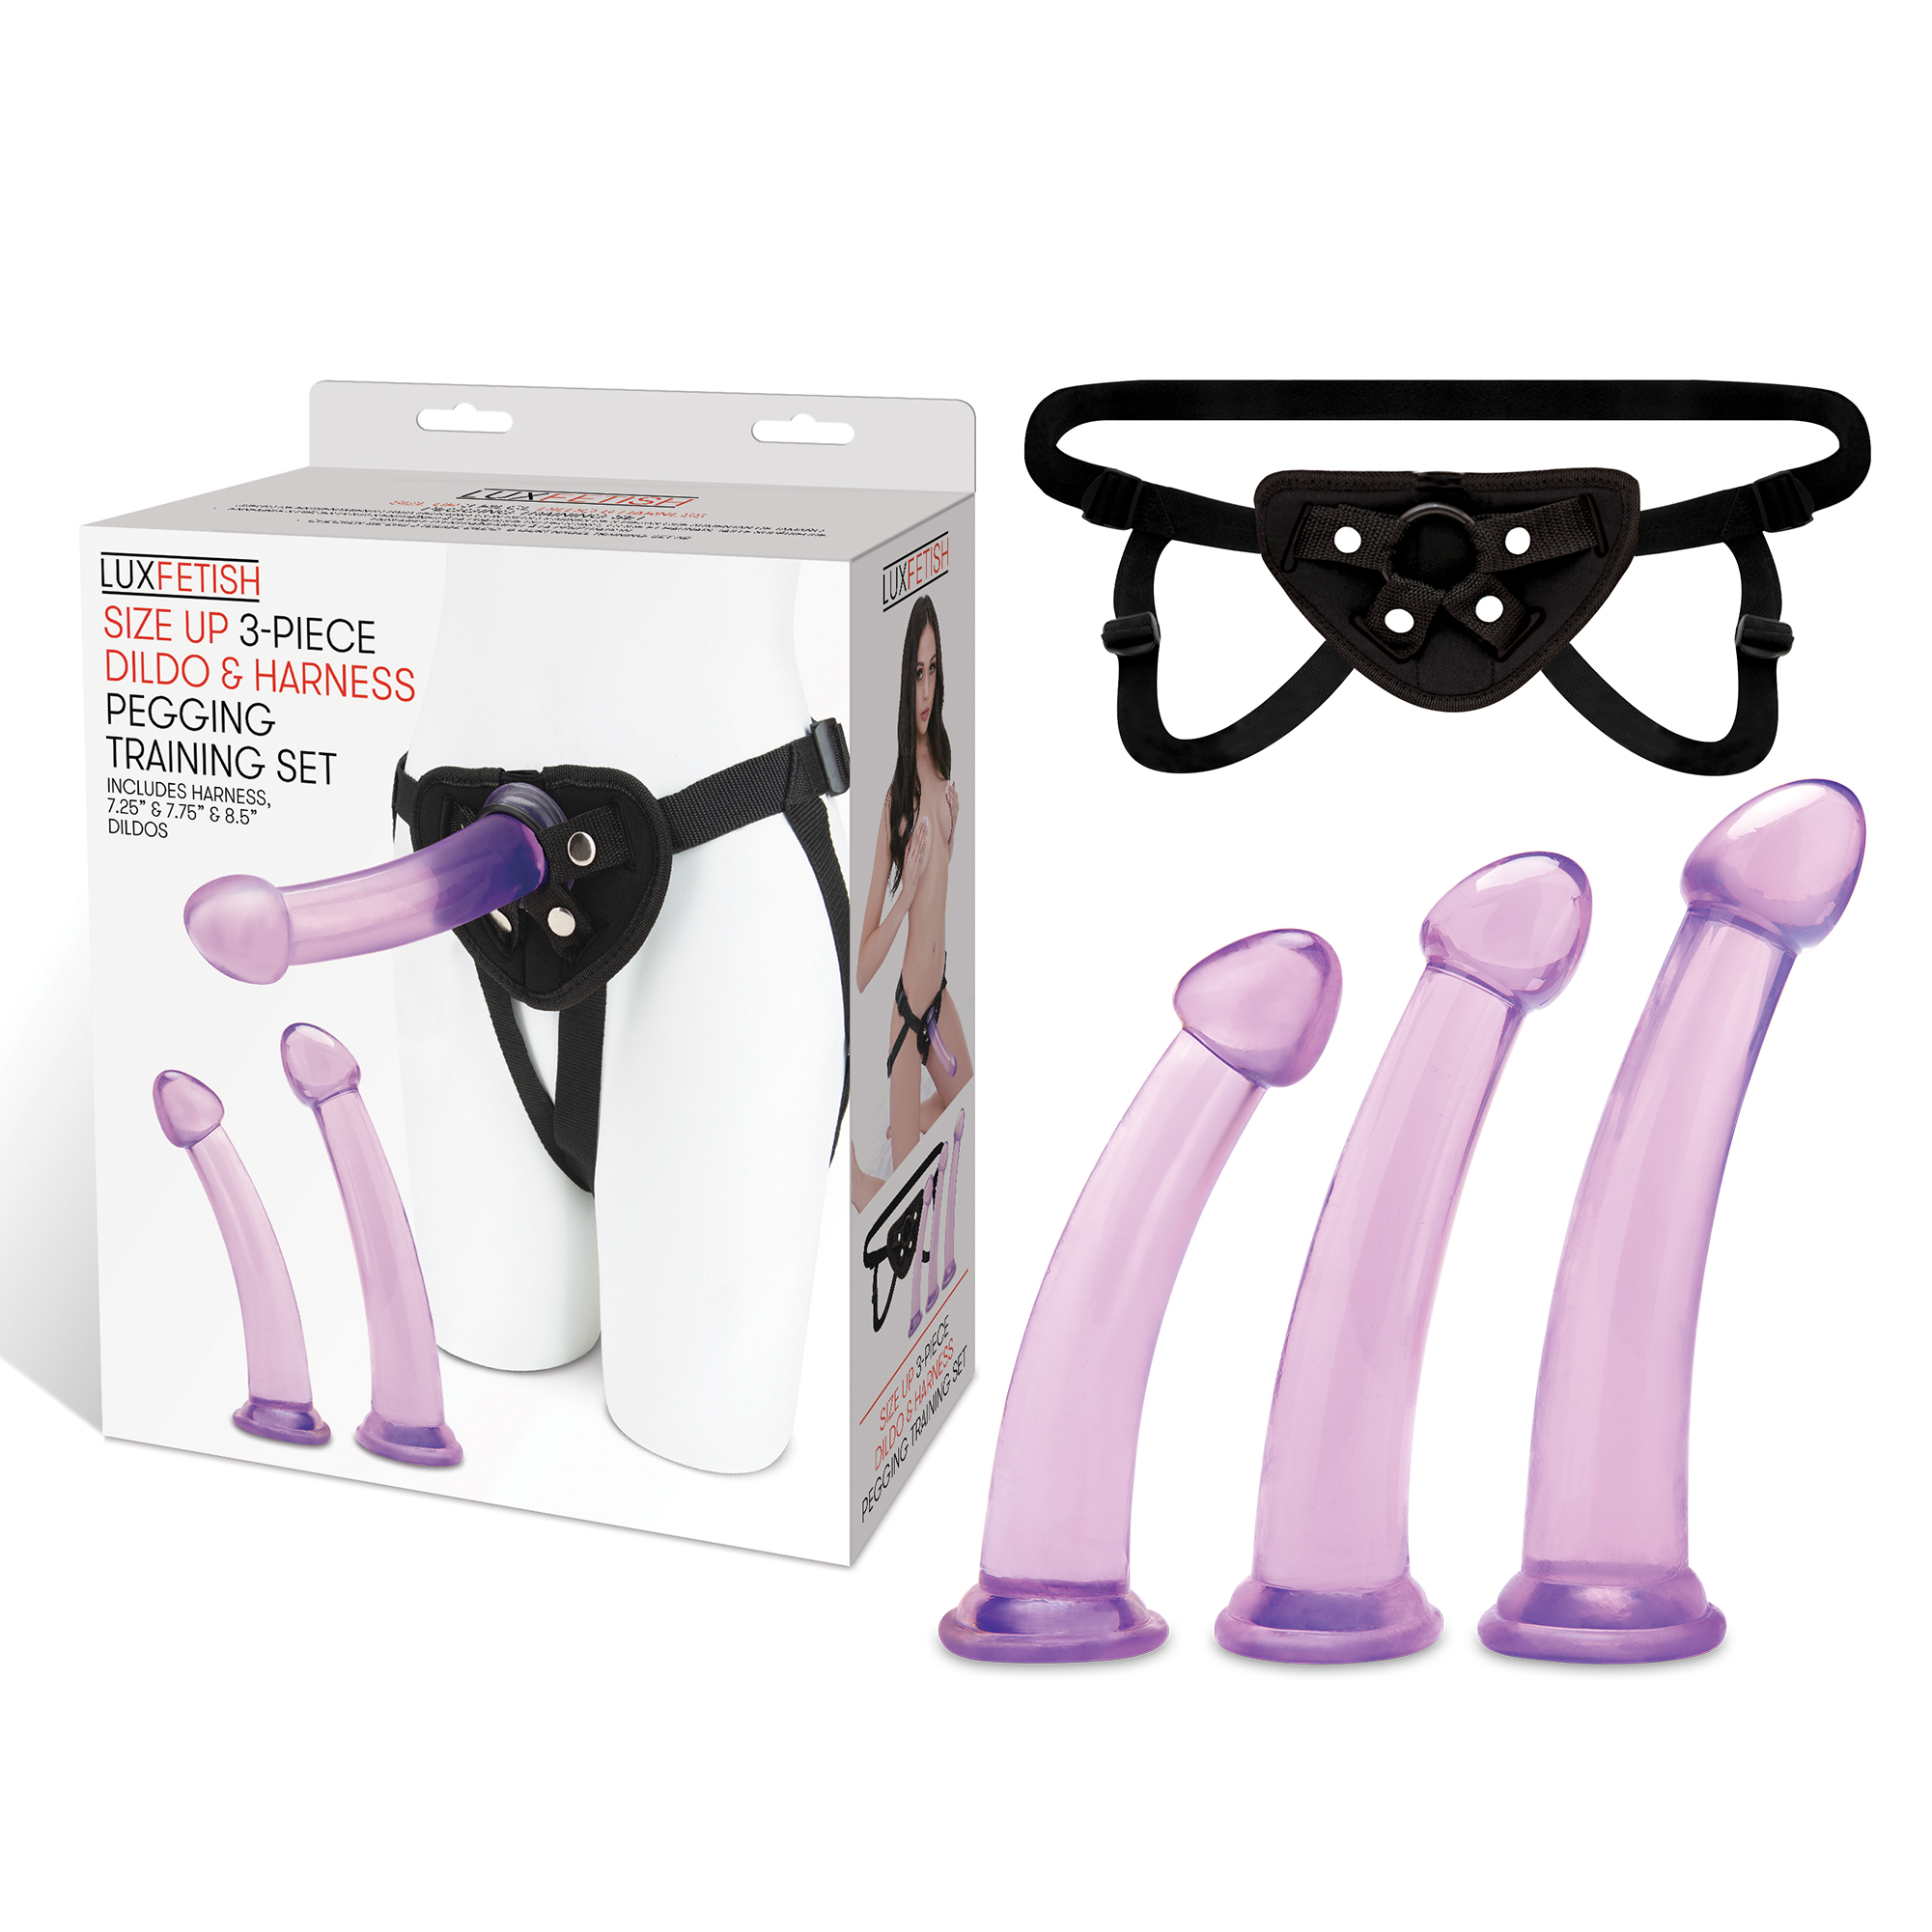 LUX FETISH Size Up 3-Piece Dildo and Harness Pegging training Set